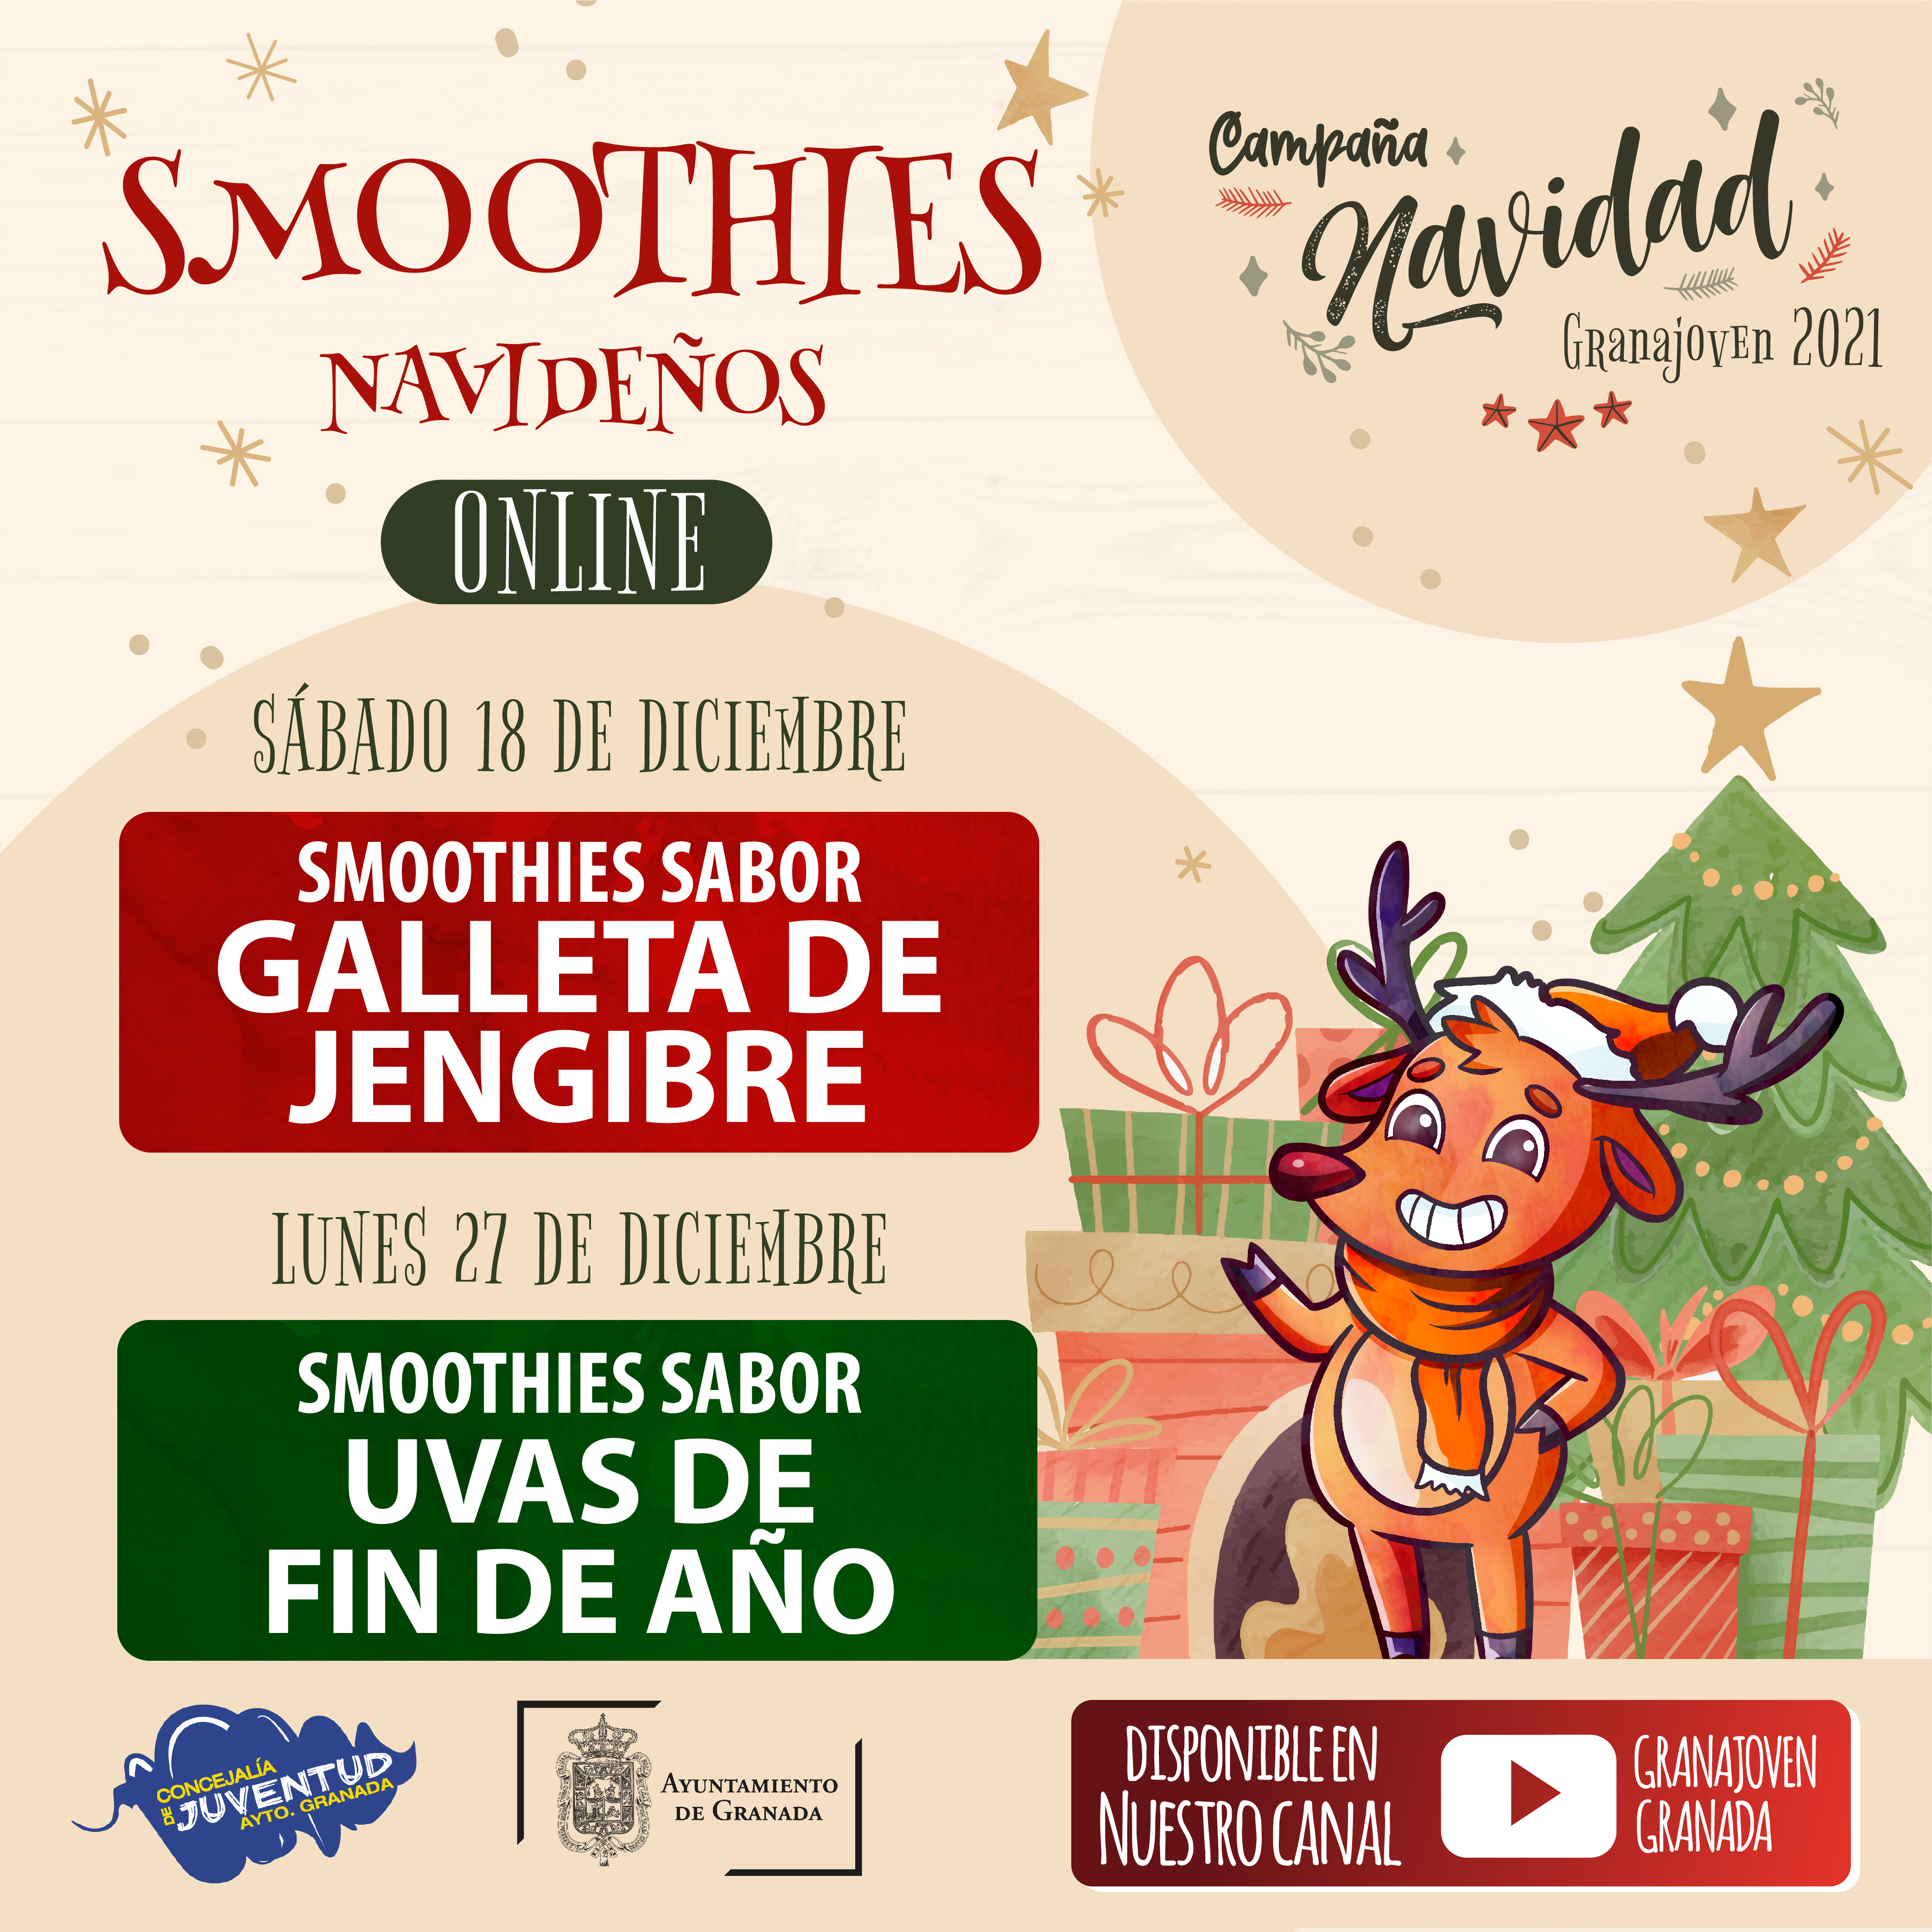 SMOOTHIES NAVIDEOS online